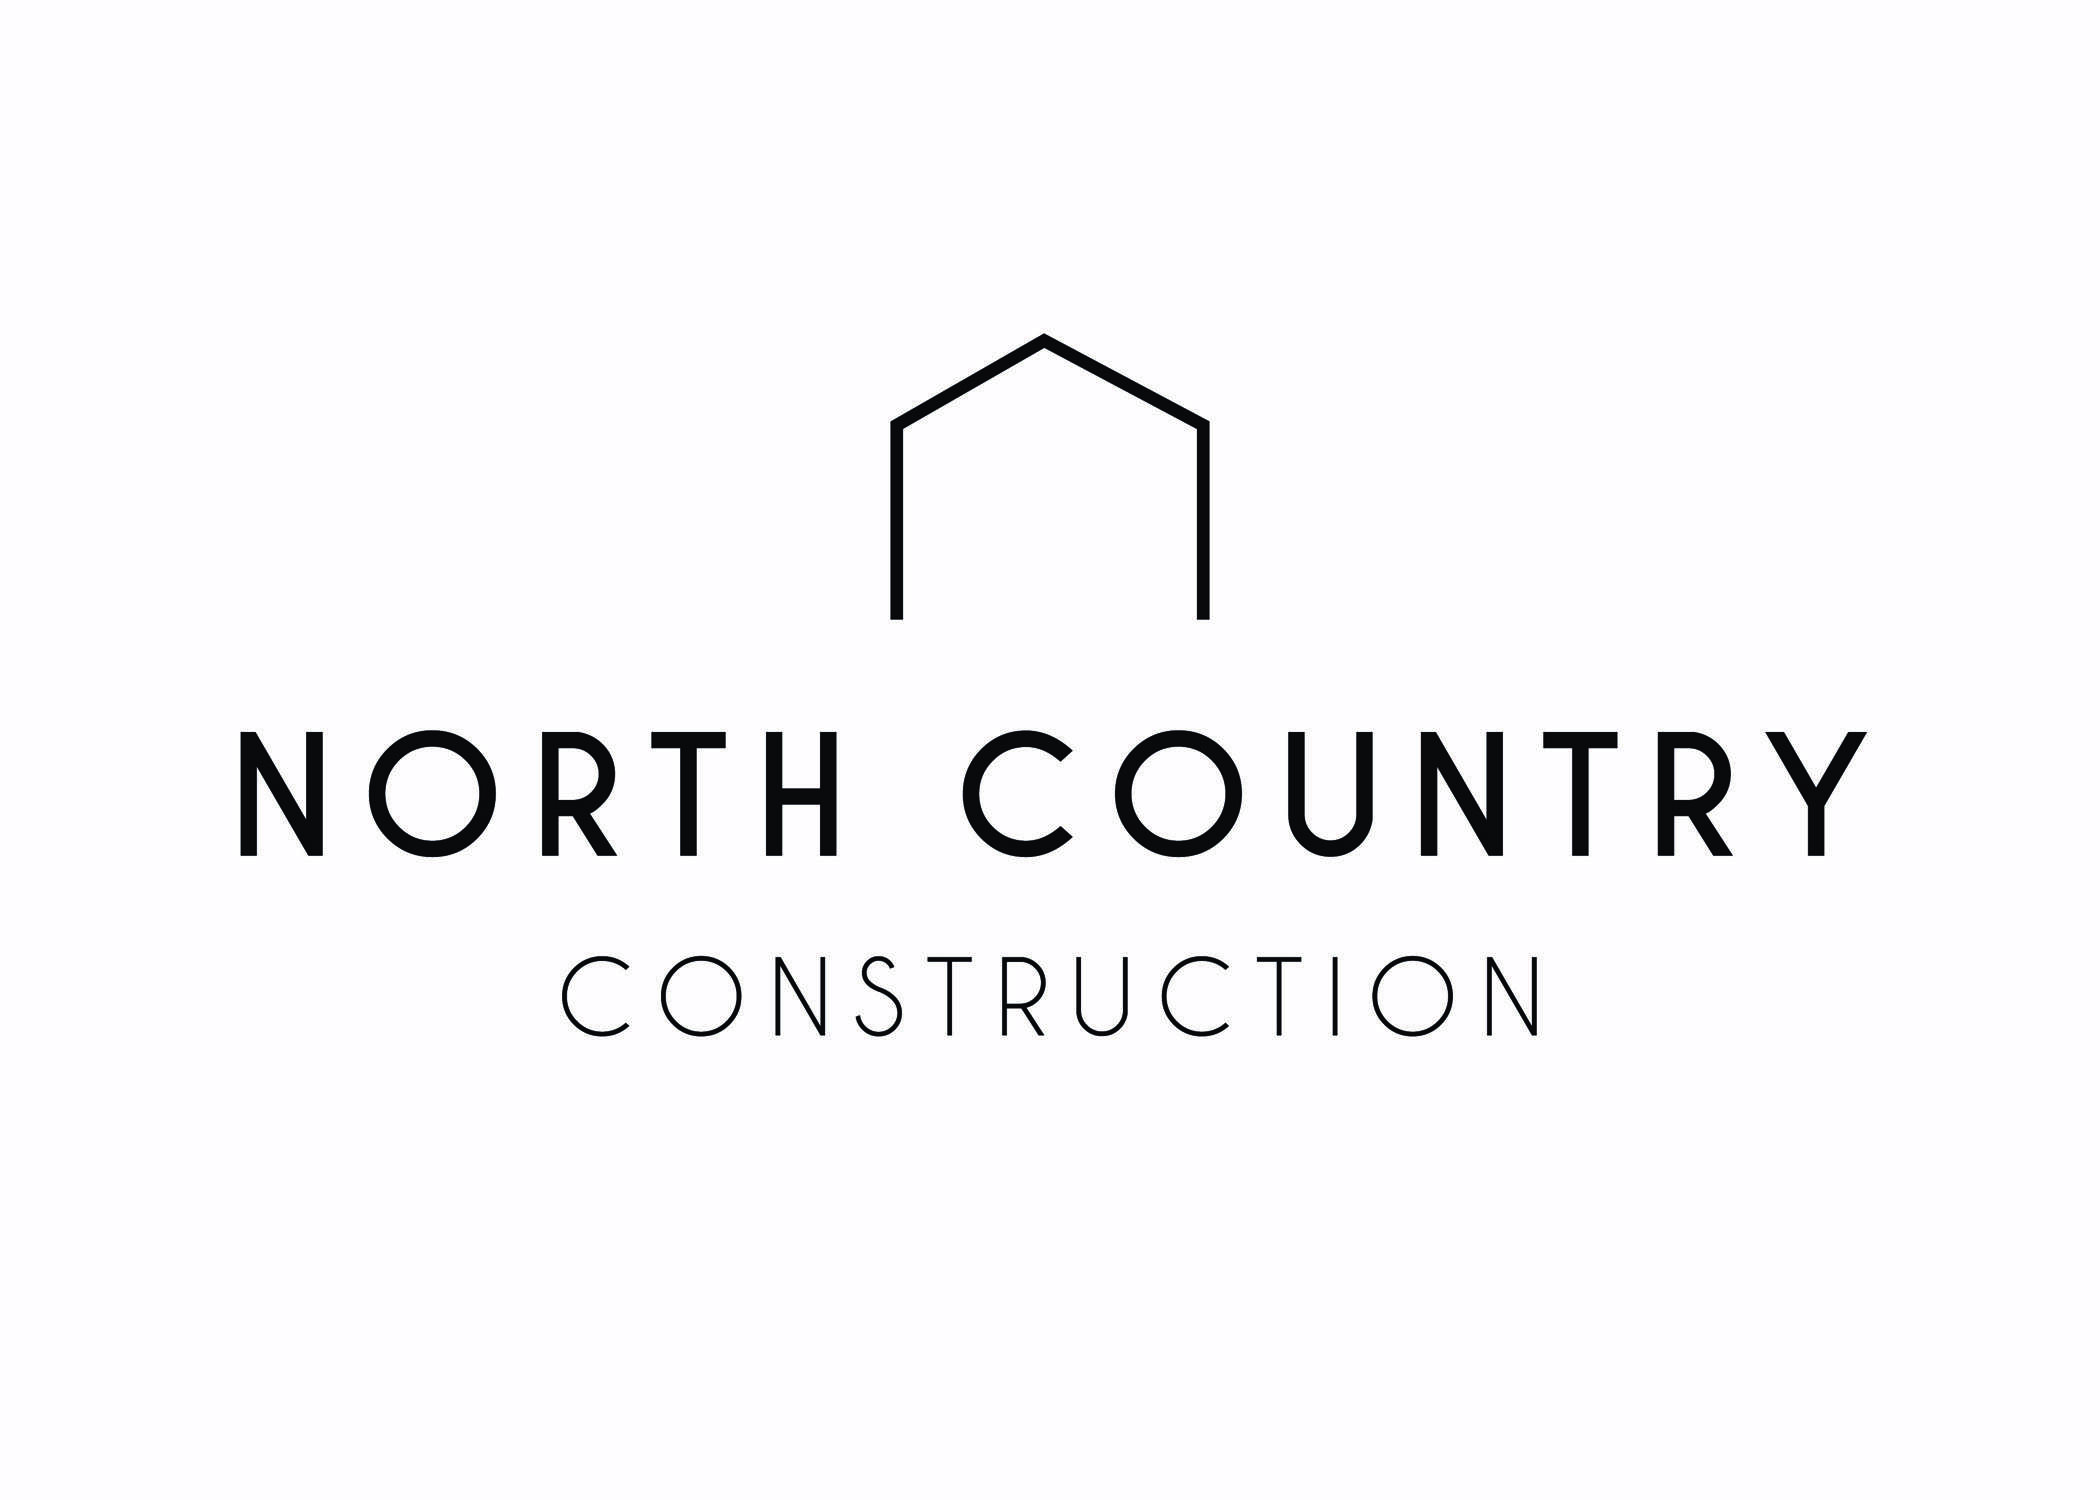 North Country Construction